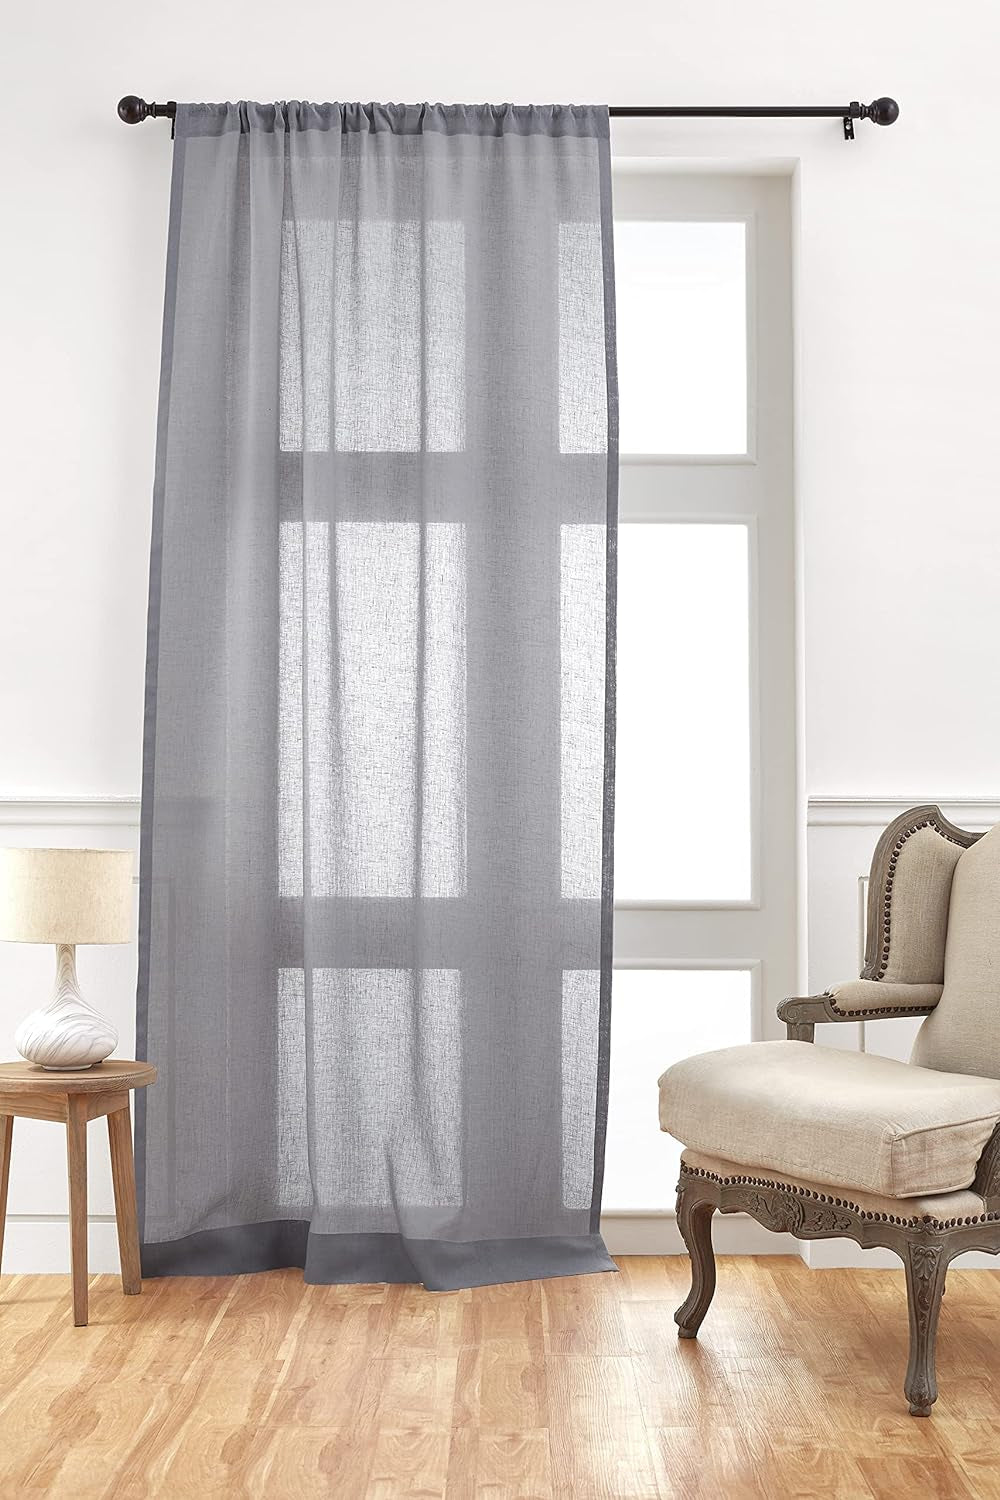 Solino Home Linen Sheer Curtain – 52 X 45 Inch Light Natural Rod Pocket Window Panel – 100% Pure Natural Fabric Curtain for Living Room, Indoor, Outdoor – Handcrafted from European Flax  Solino Home Light Grey 52 X 96 Inch 